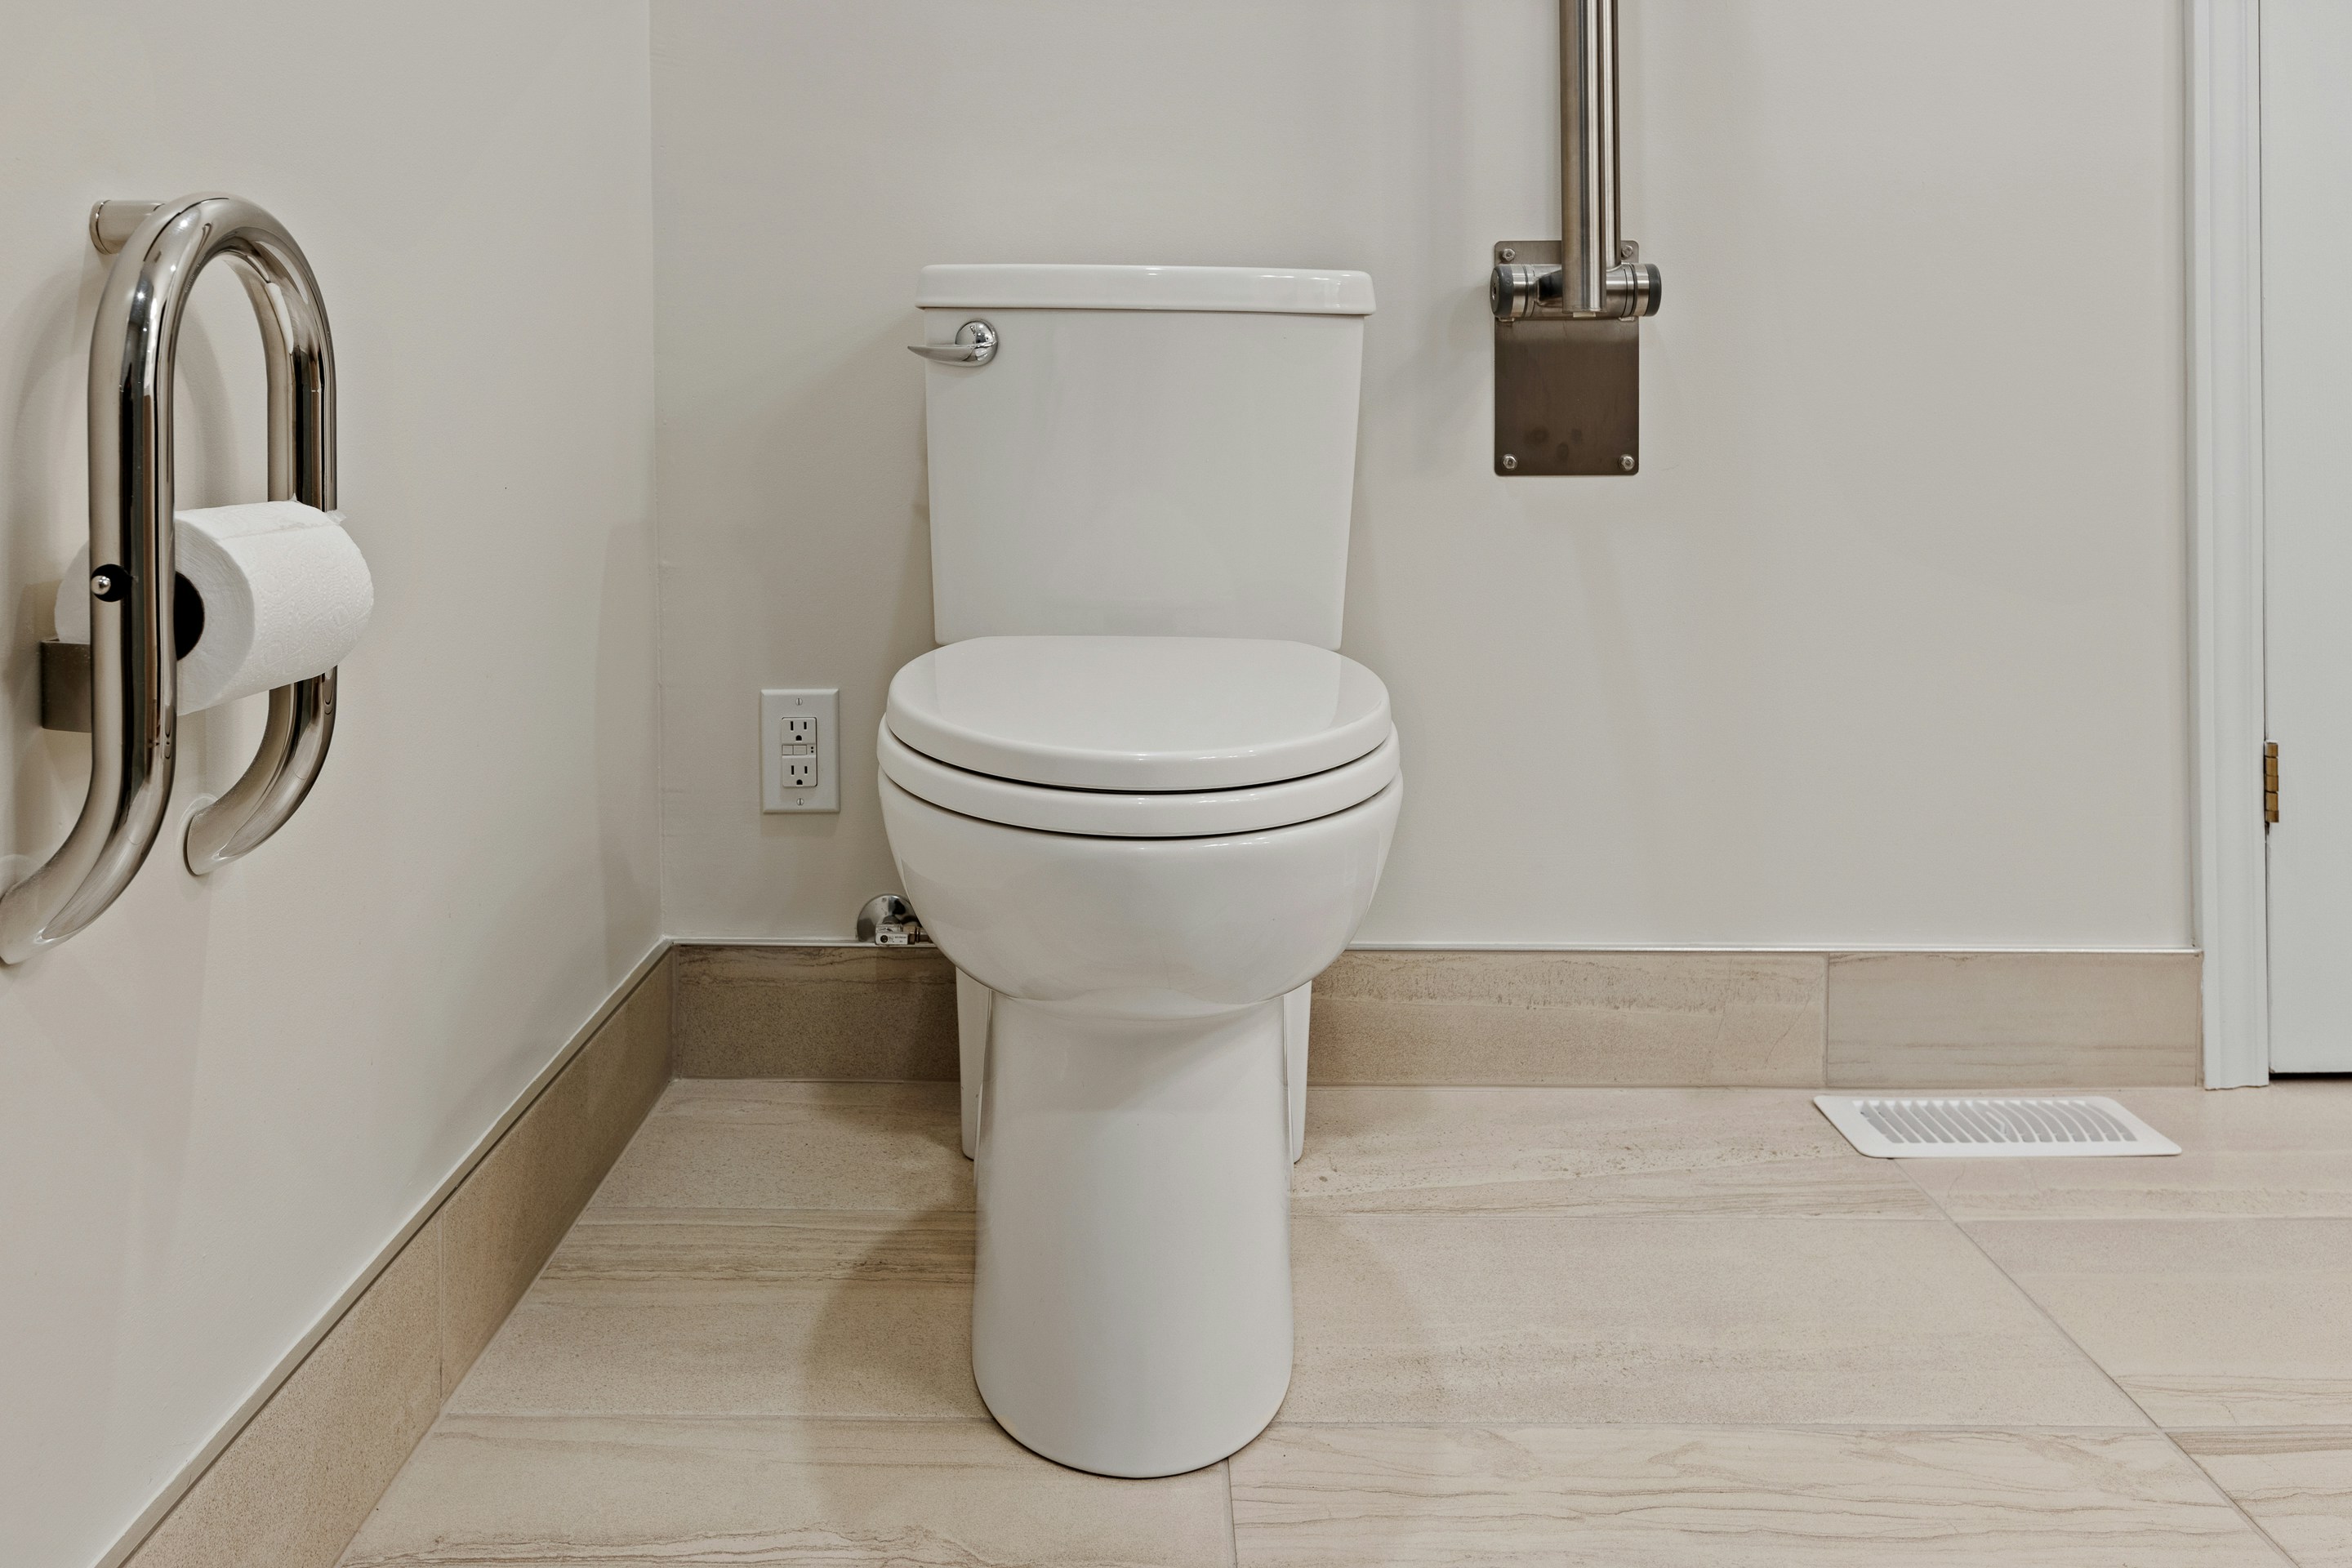 COMAI Smart Toilet Seat with Adjustable Controls and Heated Seat